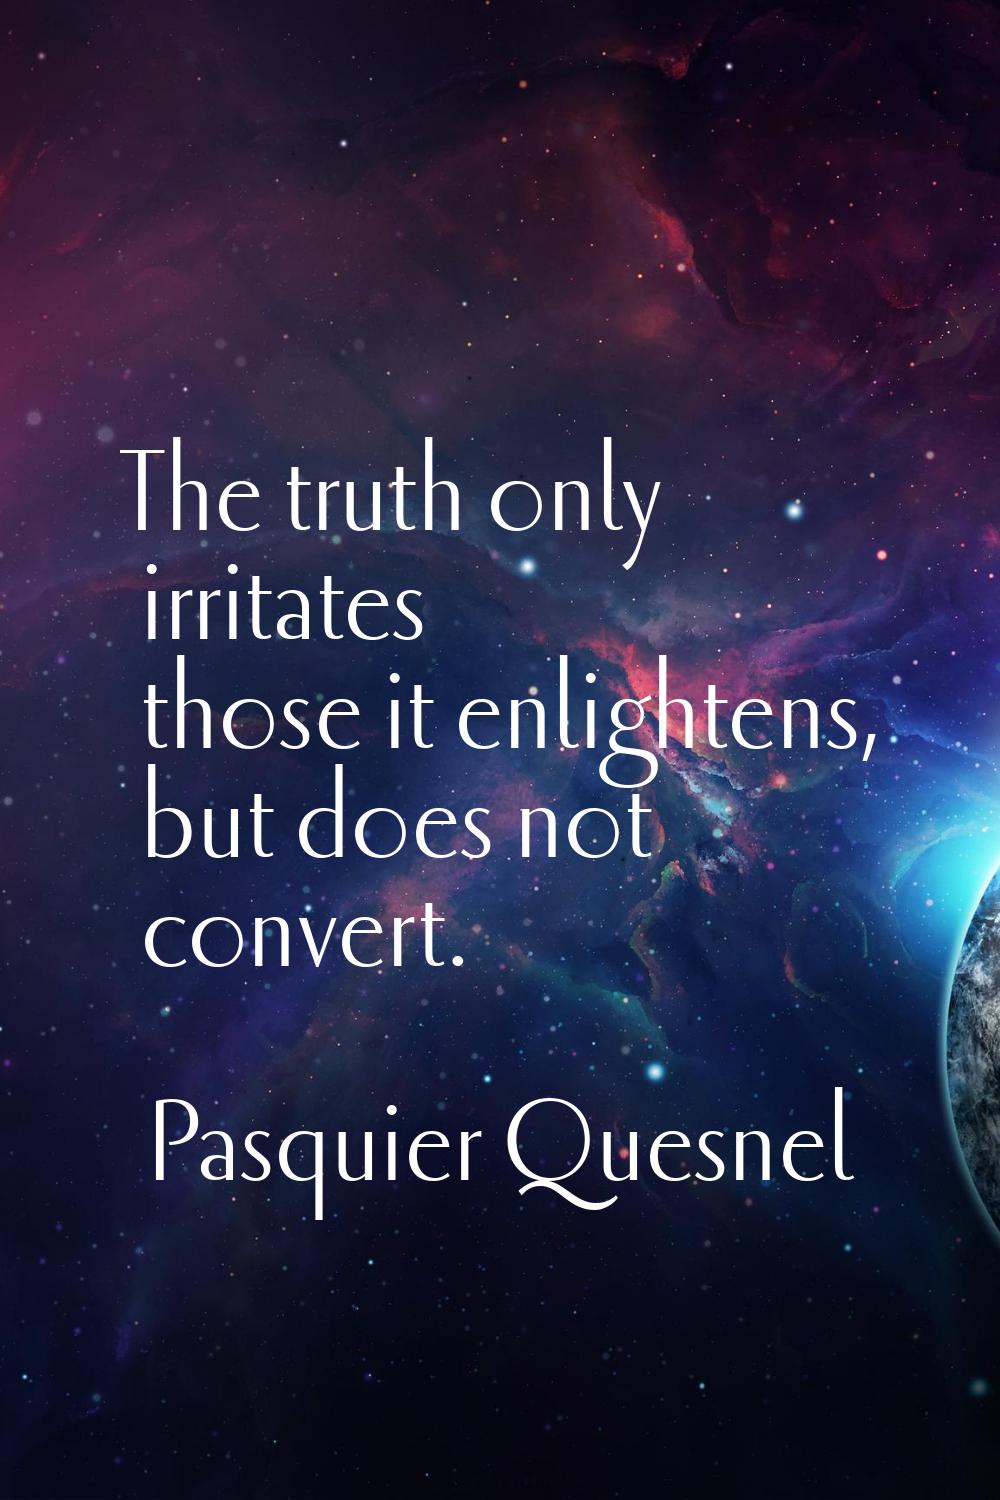 The truth only irritates those it enlightens, but does not convert.